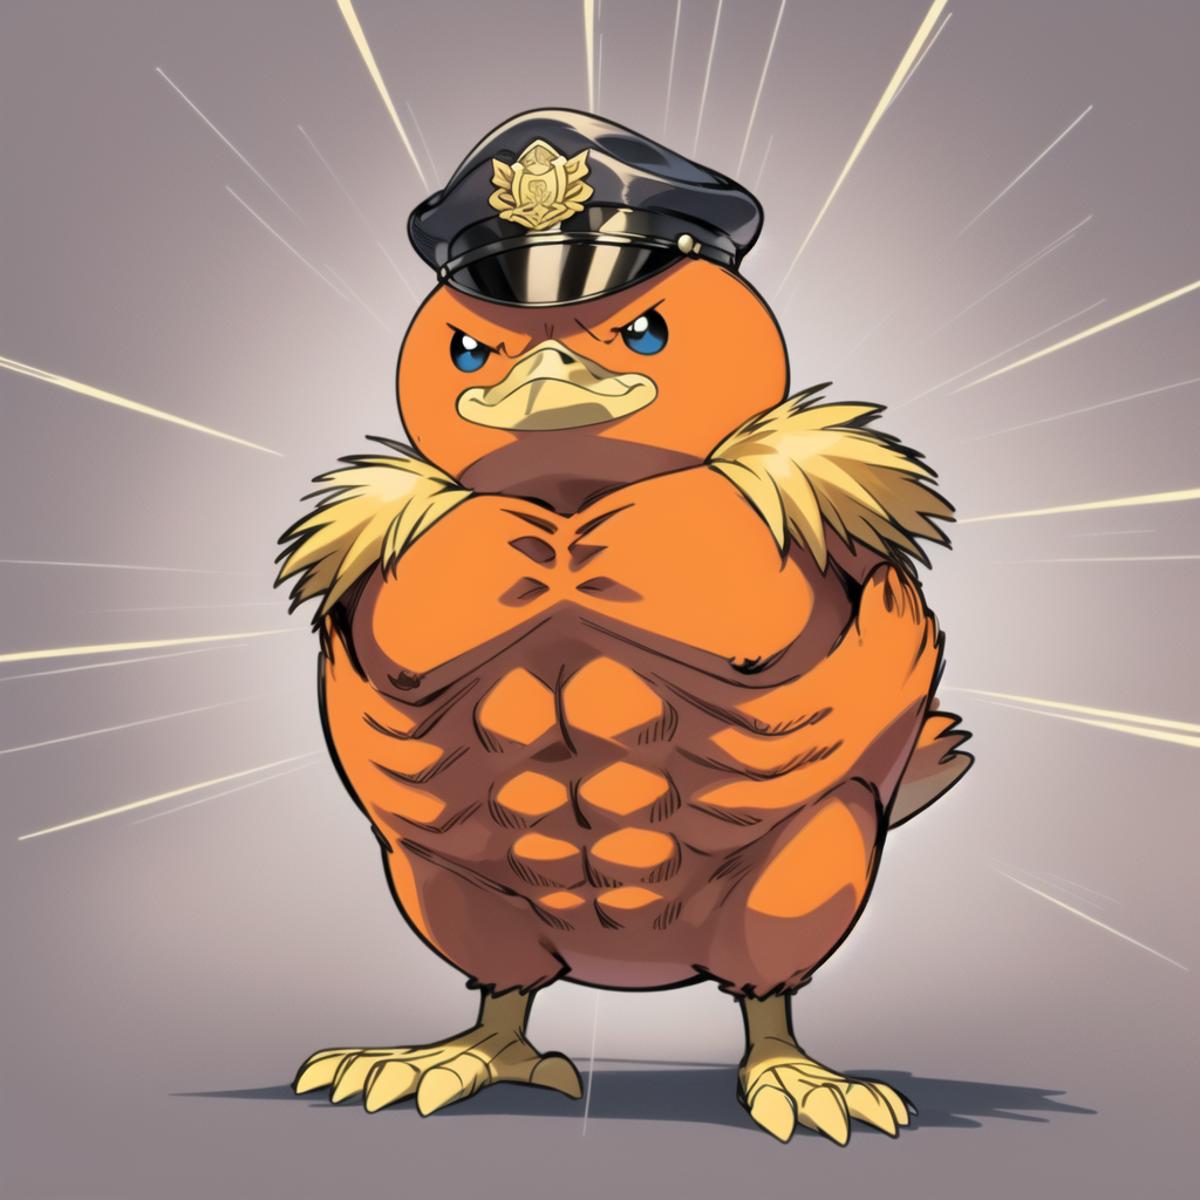 Swole Torchic image by pbuyle